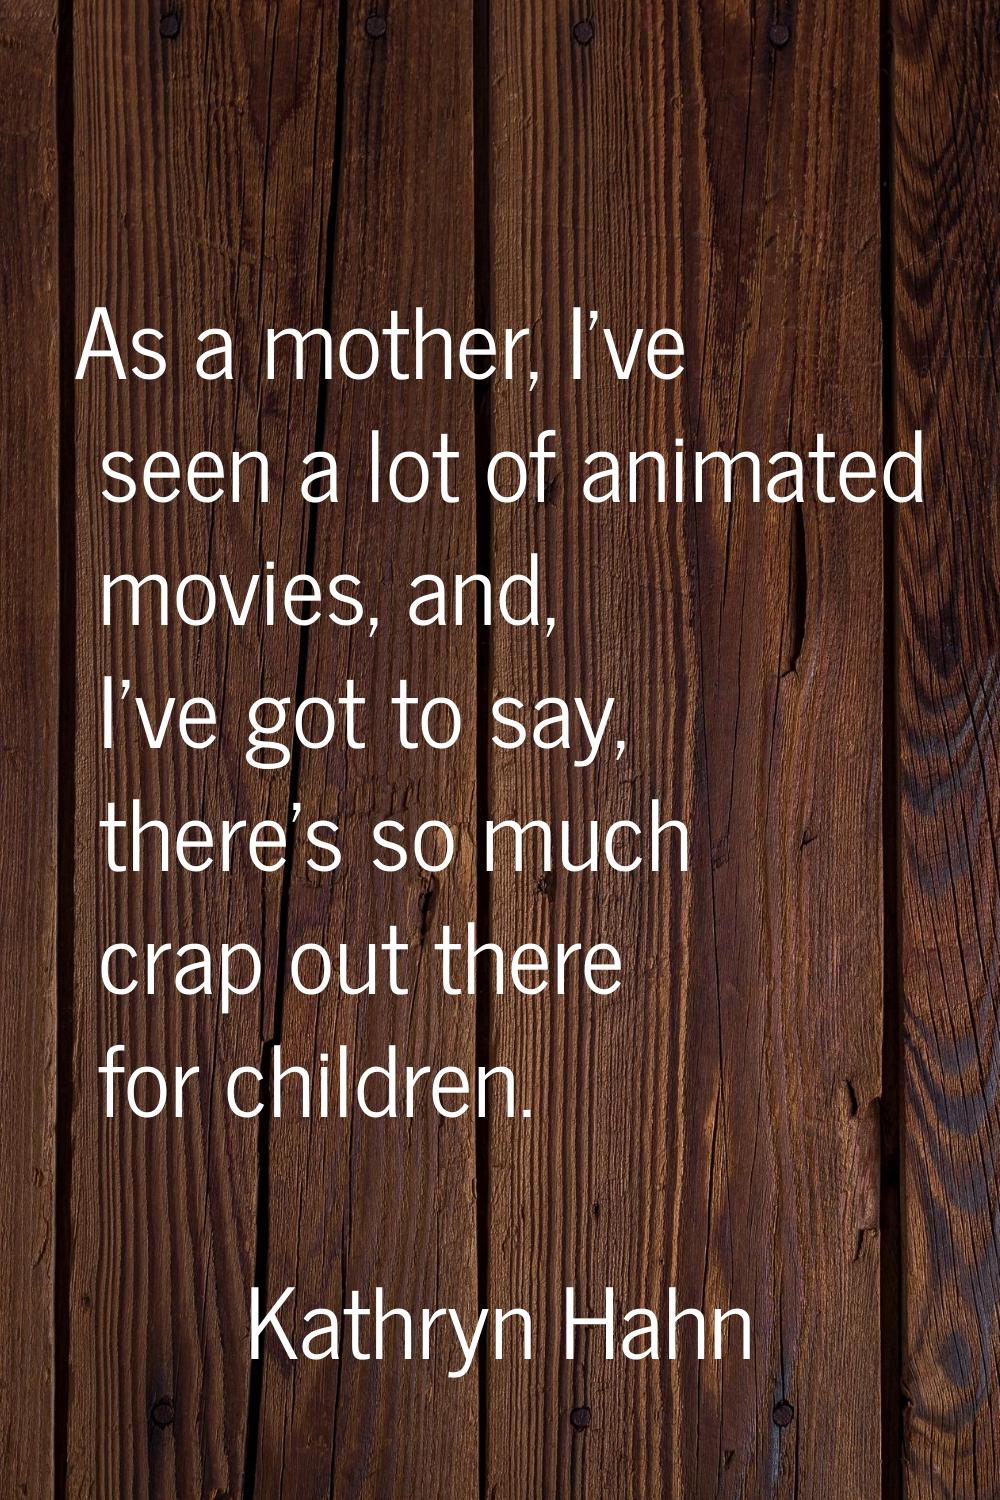 As a mother, I've seen a lot of animated movies, and, I've got to say, there's so much crap out the